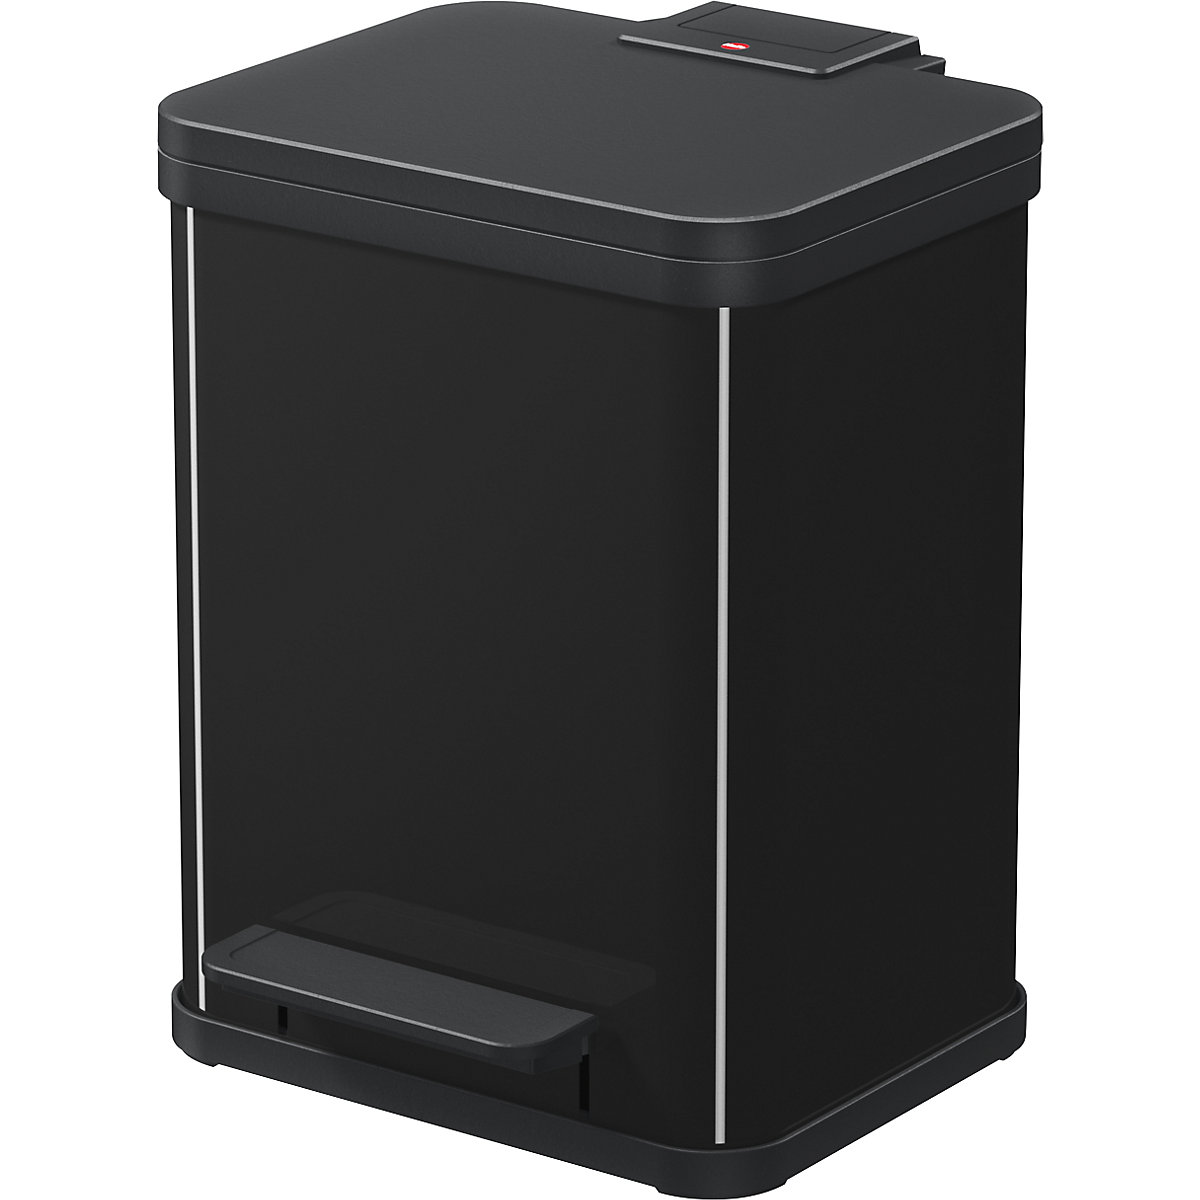 Eco waste collector with pedal – Hailo, duo Plus M, capacity 2 x 9 l, black-7